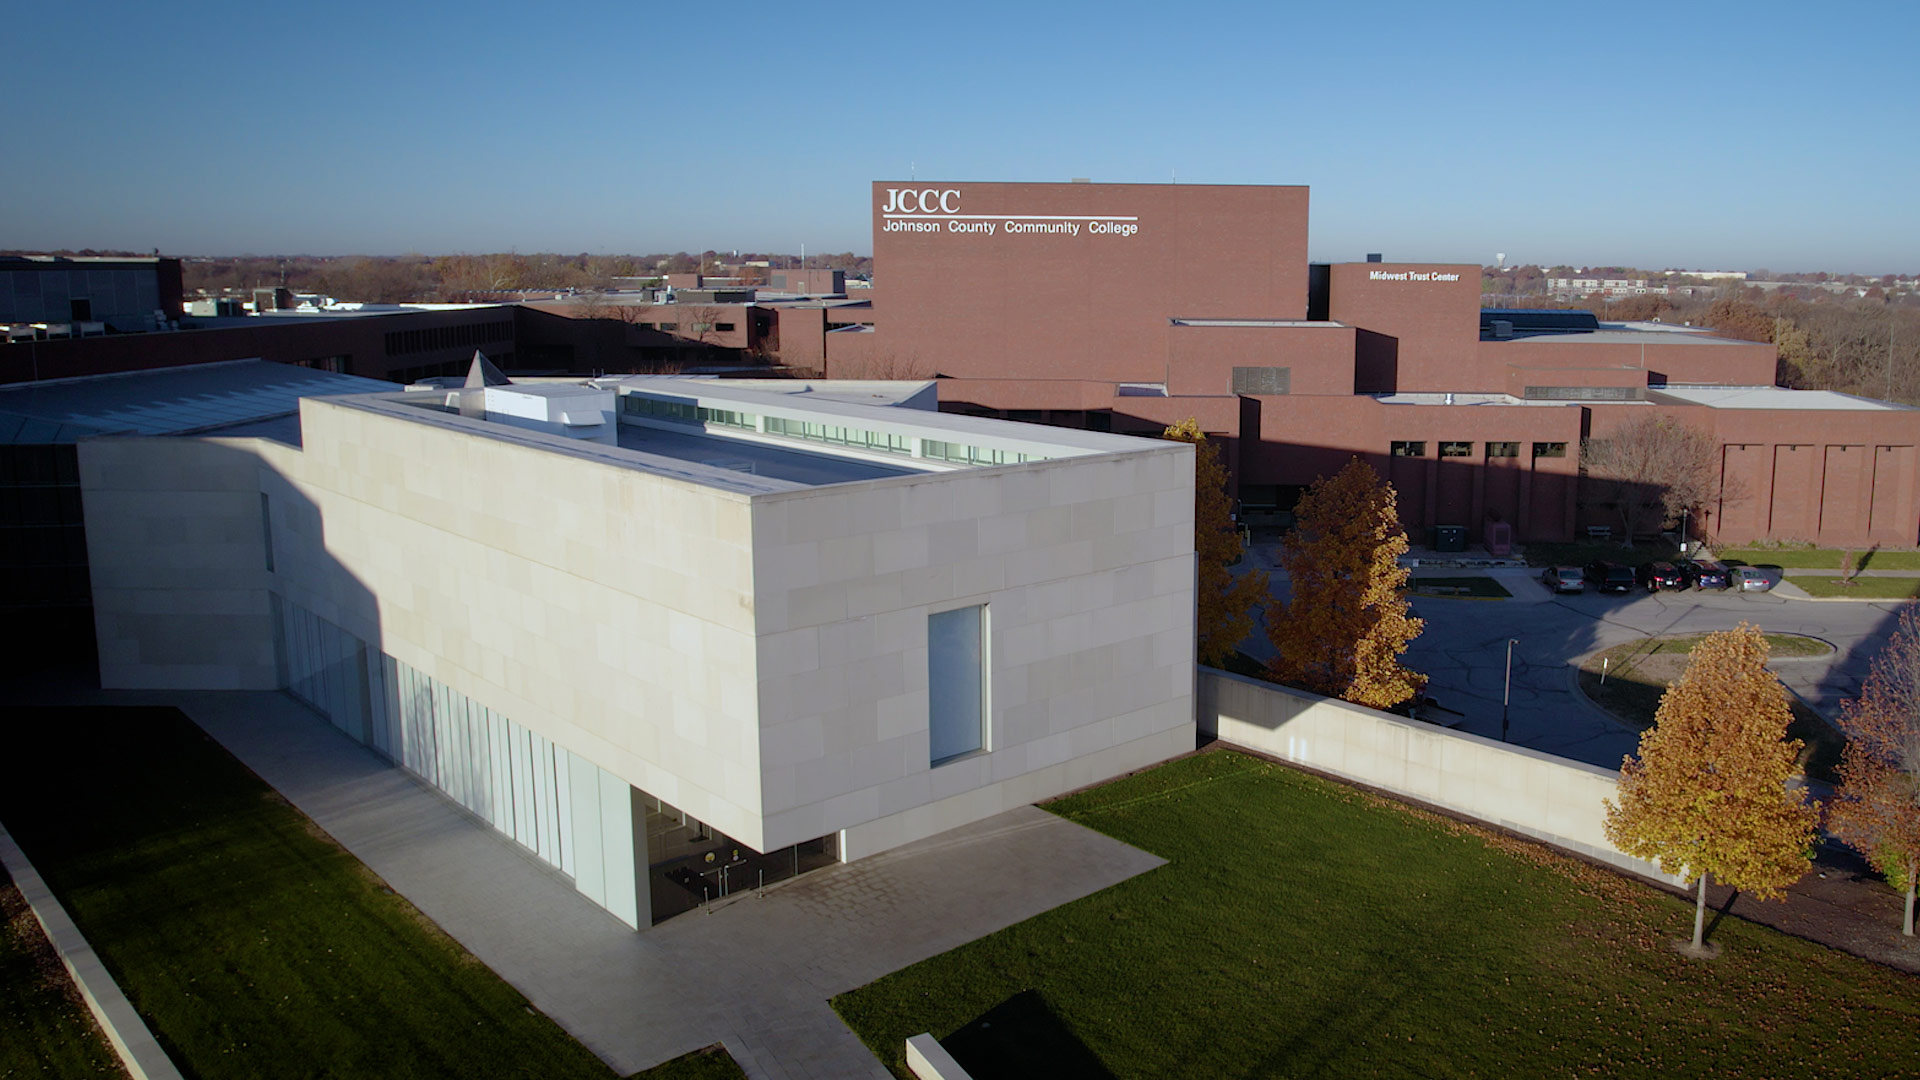 Drone shot of the front exterior of campus, highlighting buildings with Midwest Trust Center and Nerman Museum of Contemporary Art